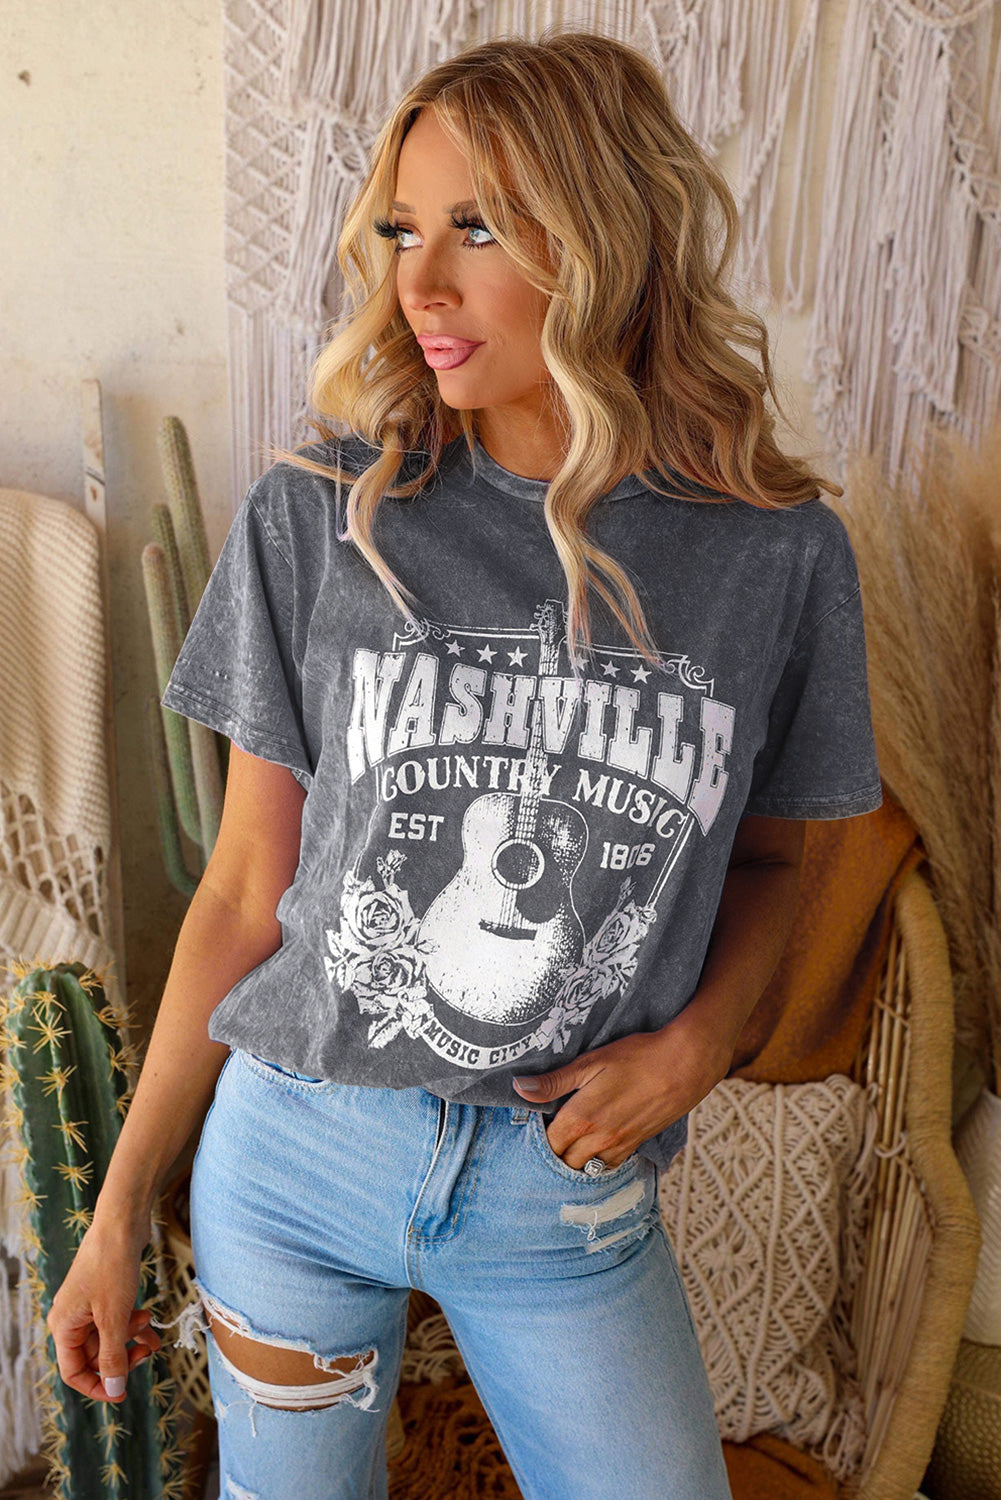 NASHVILLE COUNTRY MUSIC Graphic Round Neck Tee Shirt (2 Colors)  Krazy Heart Designs Boutique Charcoal S 